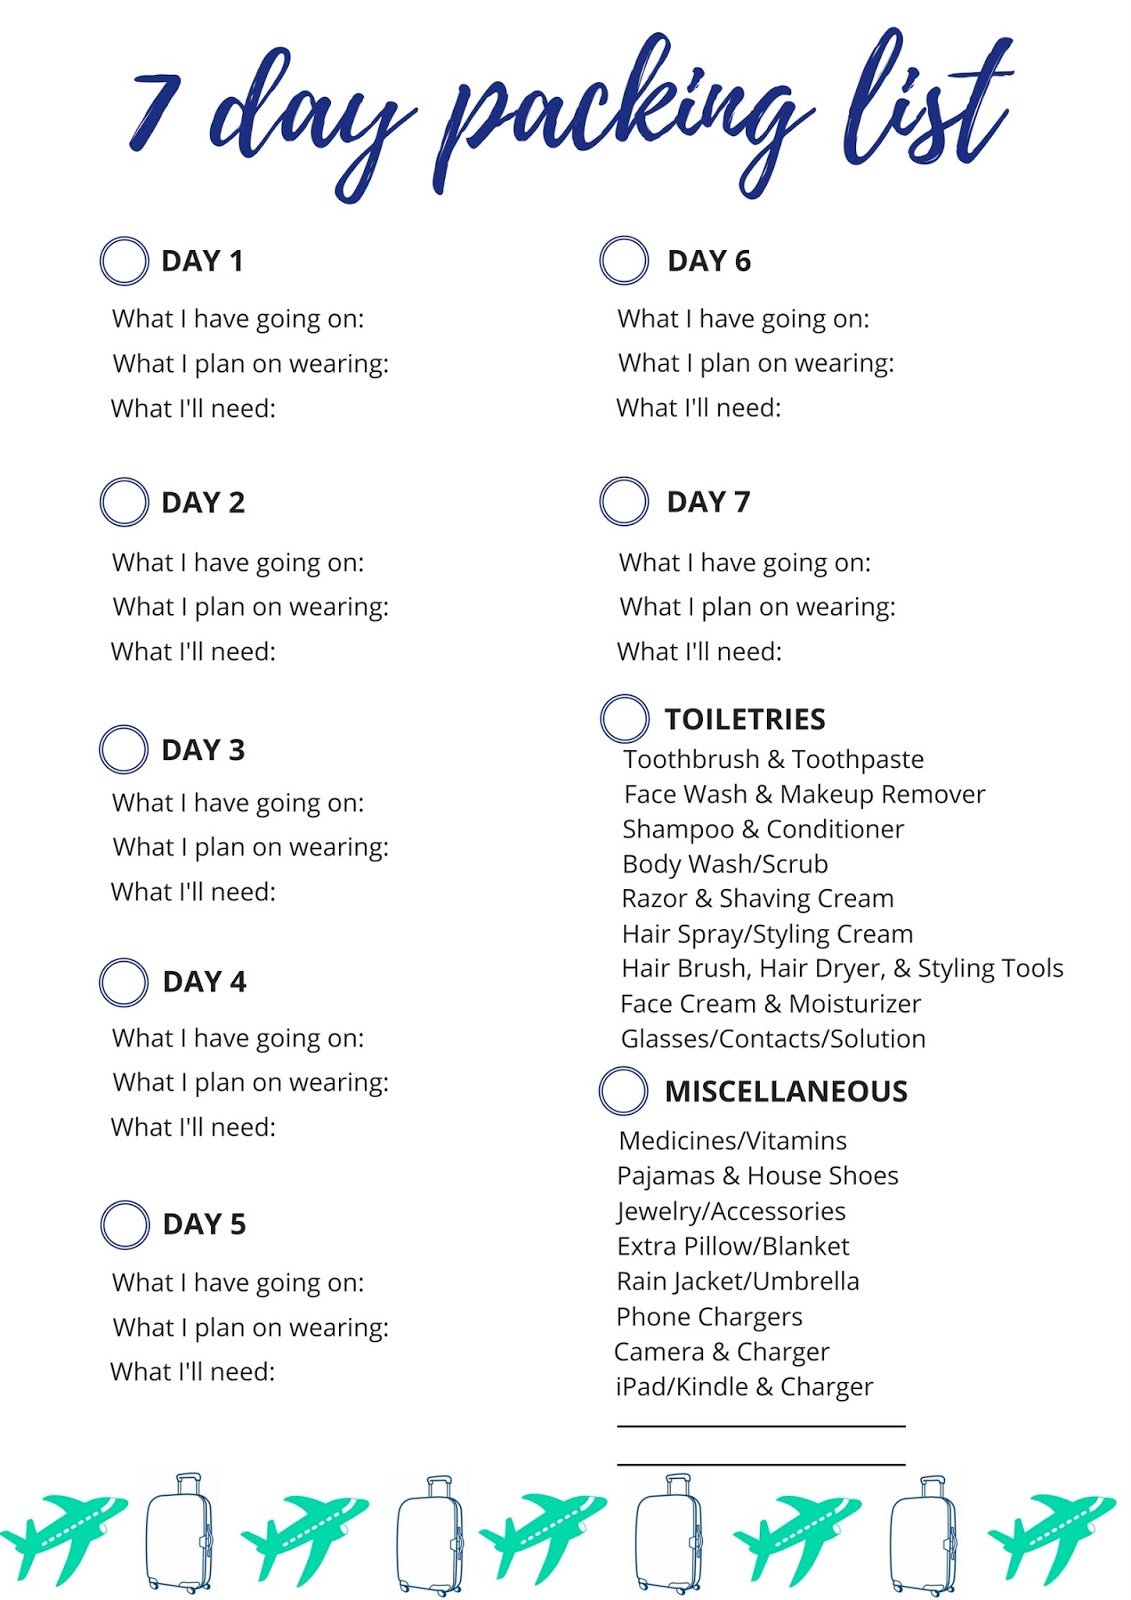 Life As The Coats 7 Day Packing List Printable